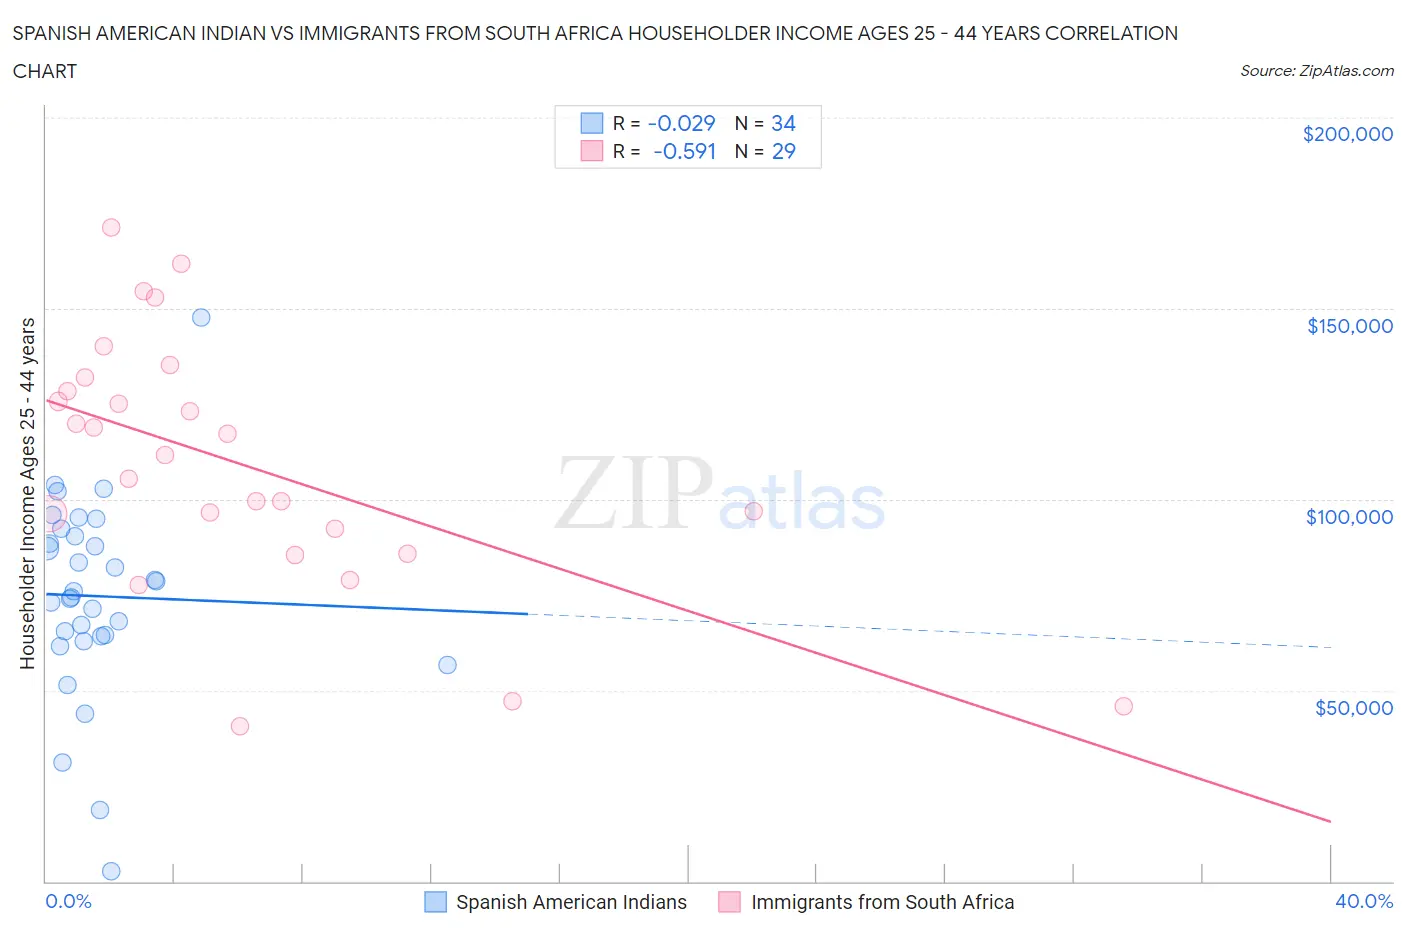 Spanish American Indian vs Immigrants from South Africa Householder Income Ages 25 - 44 years